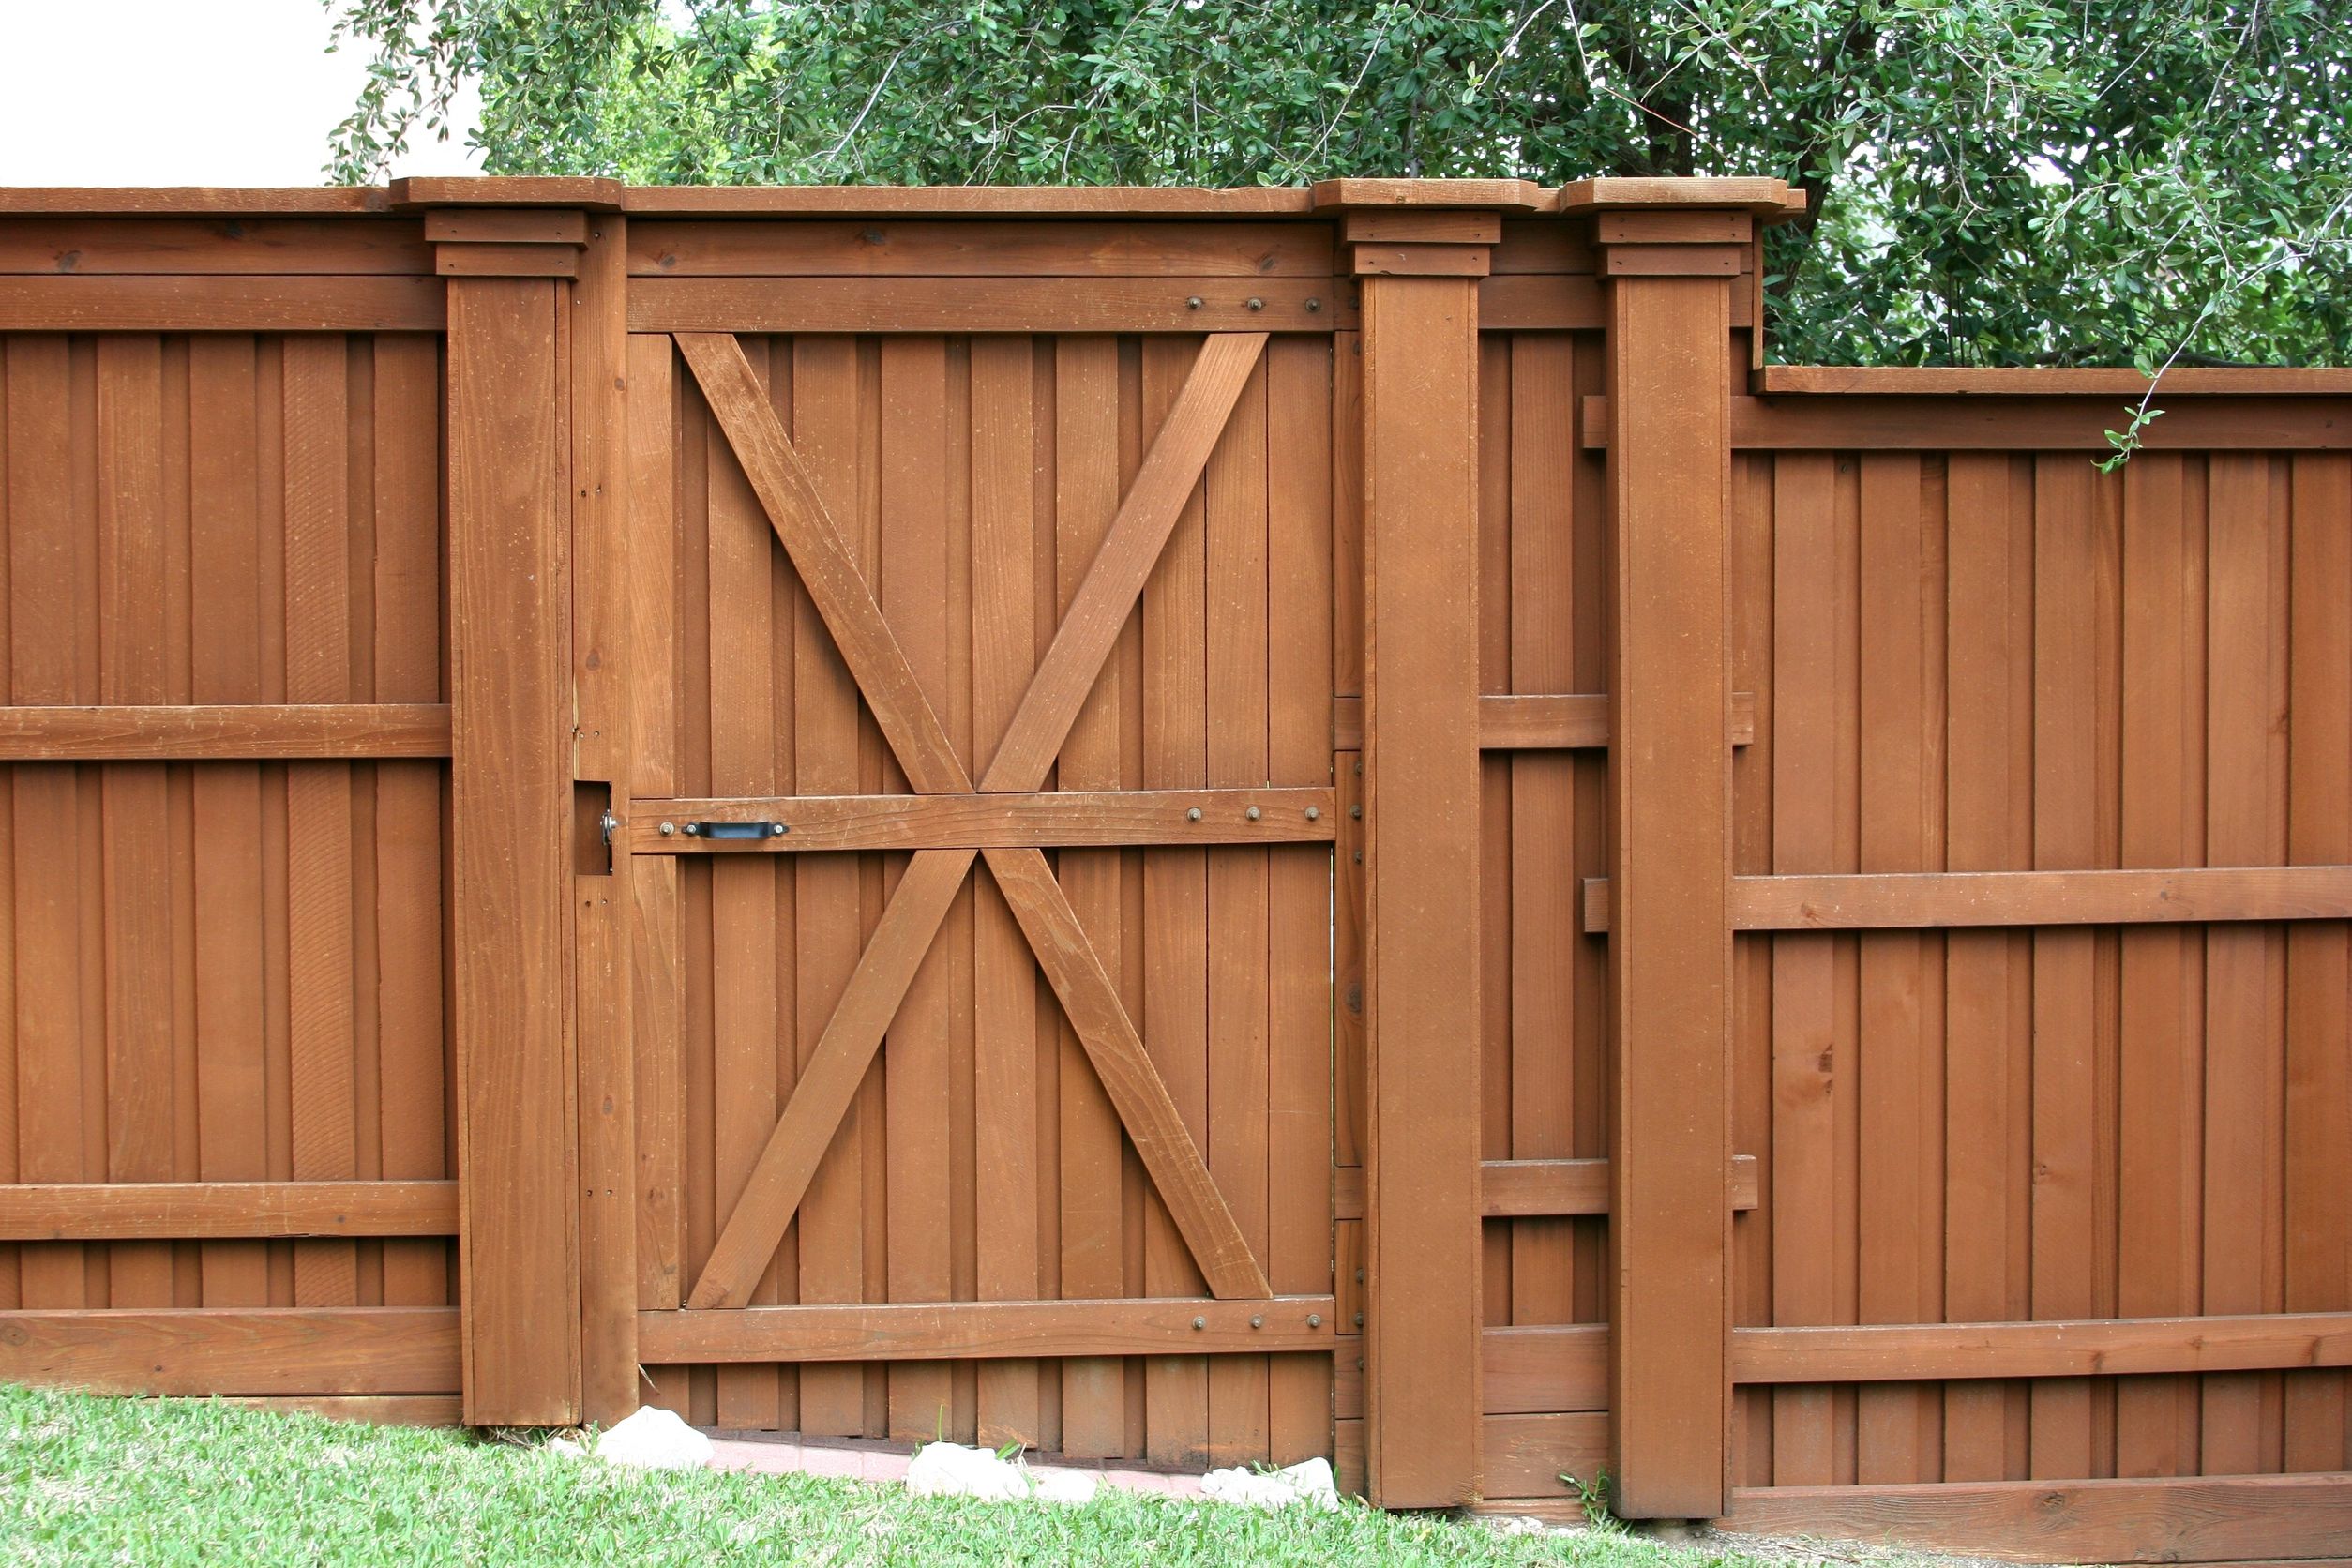 The Professional Fence Installation in Ocoee You Have Been Looking for